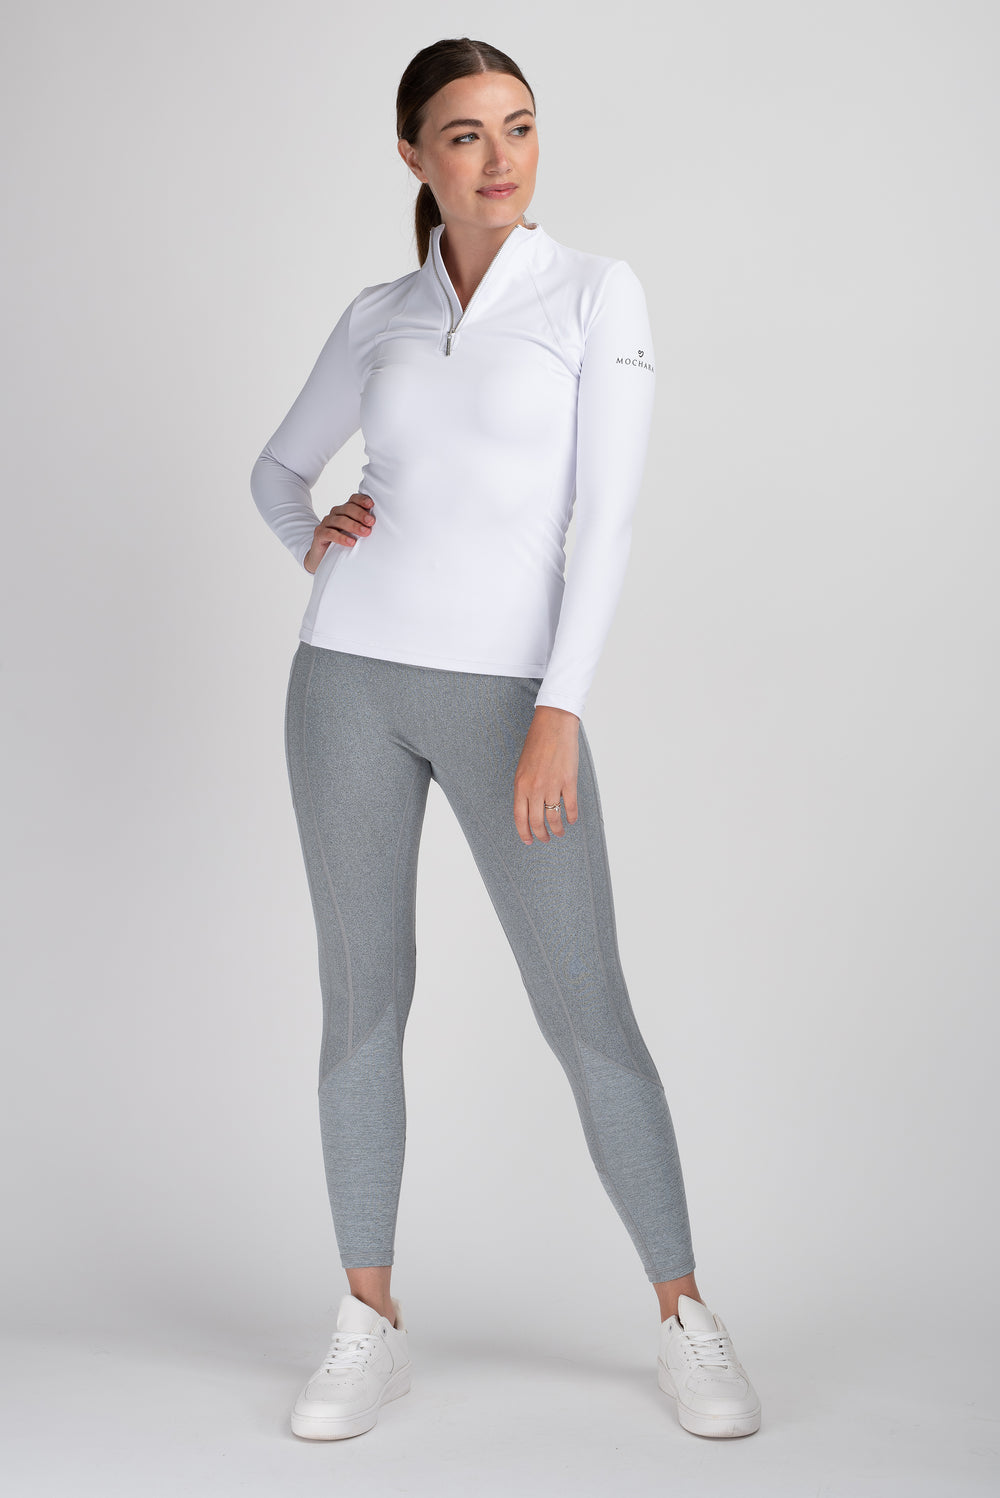 Woman in white top and gray horse riding tights standing confidently.